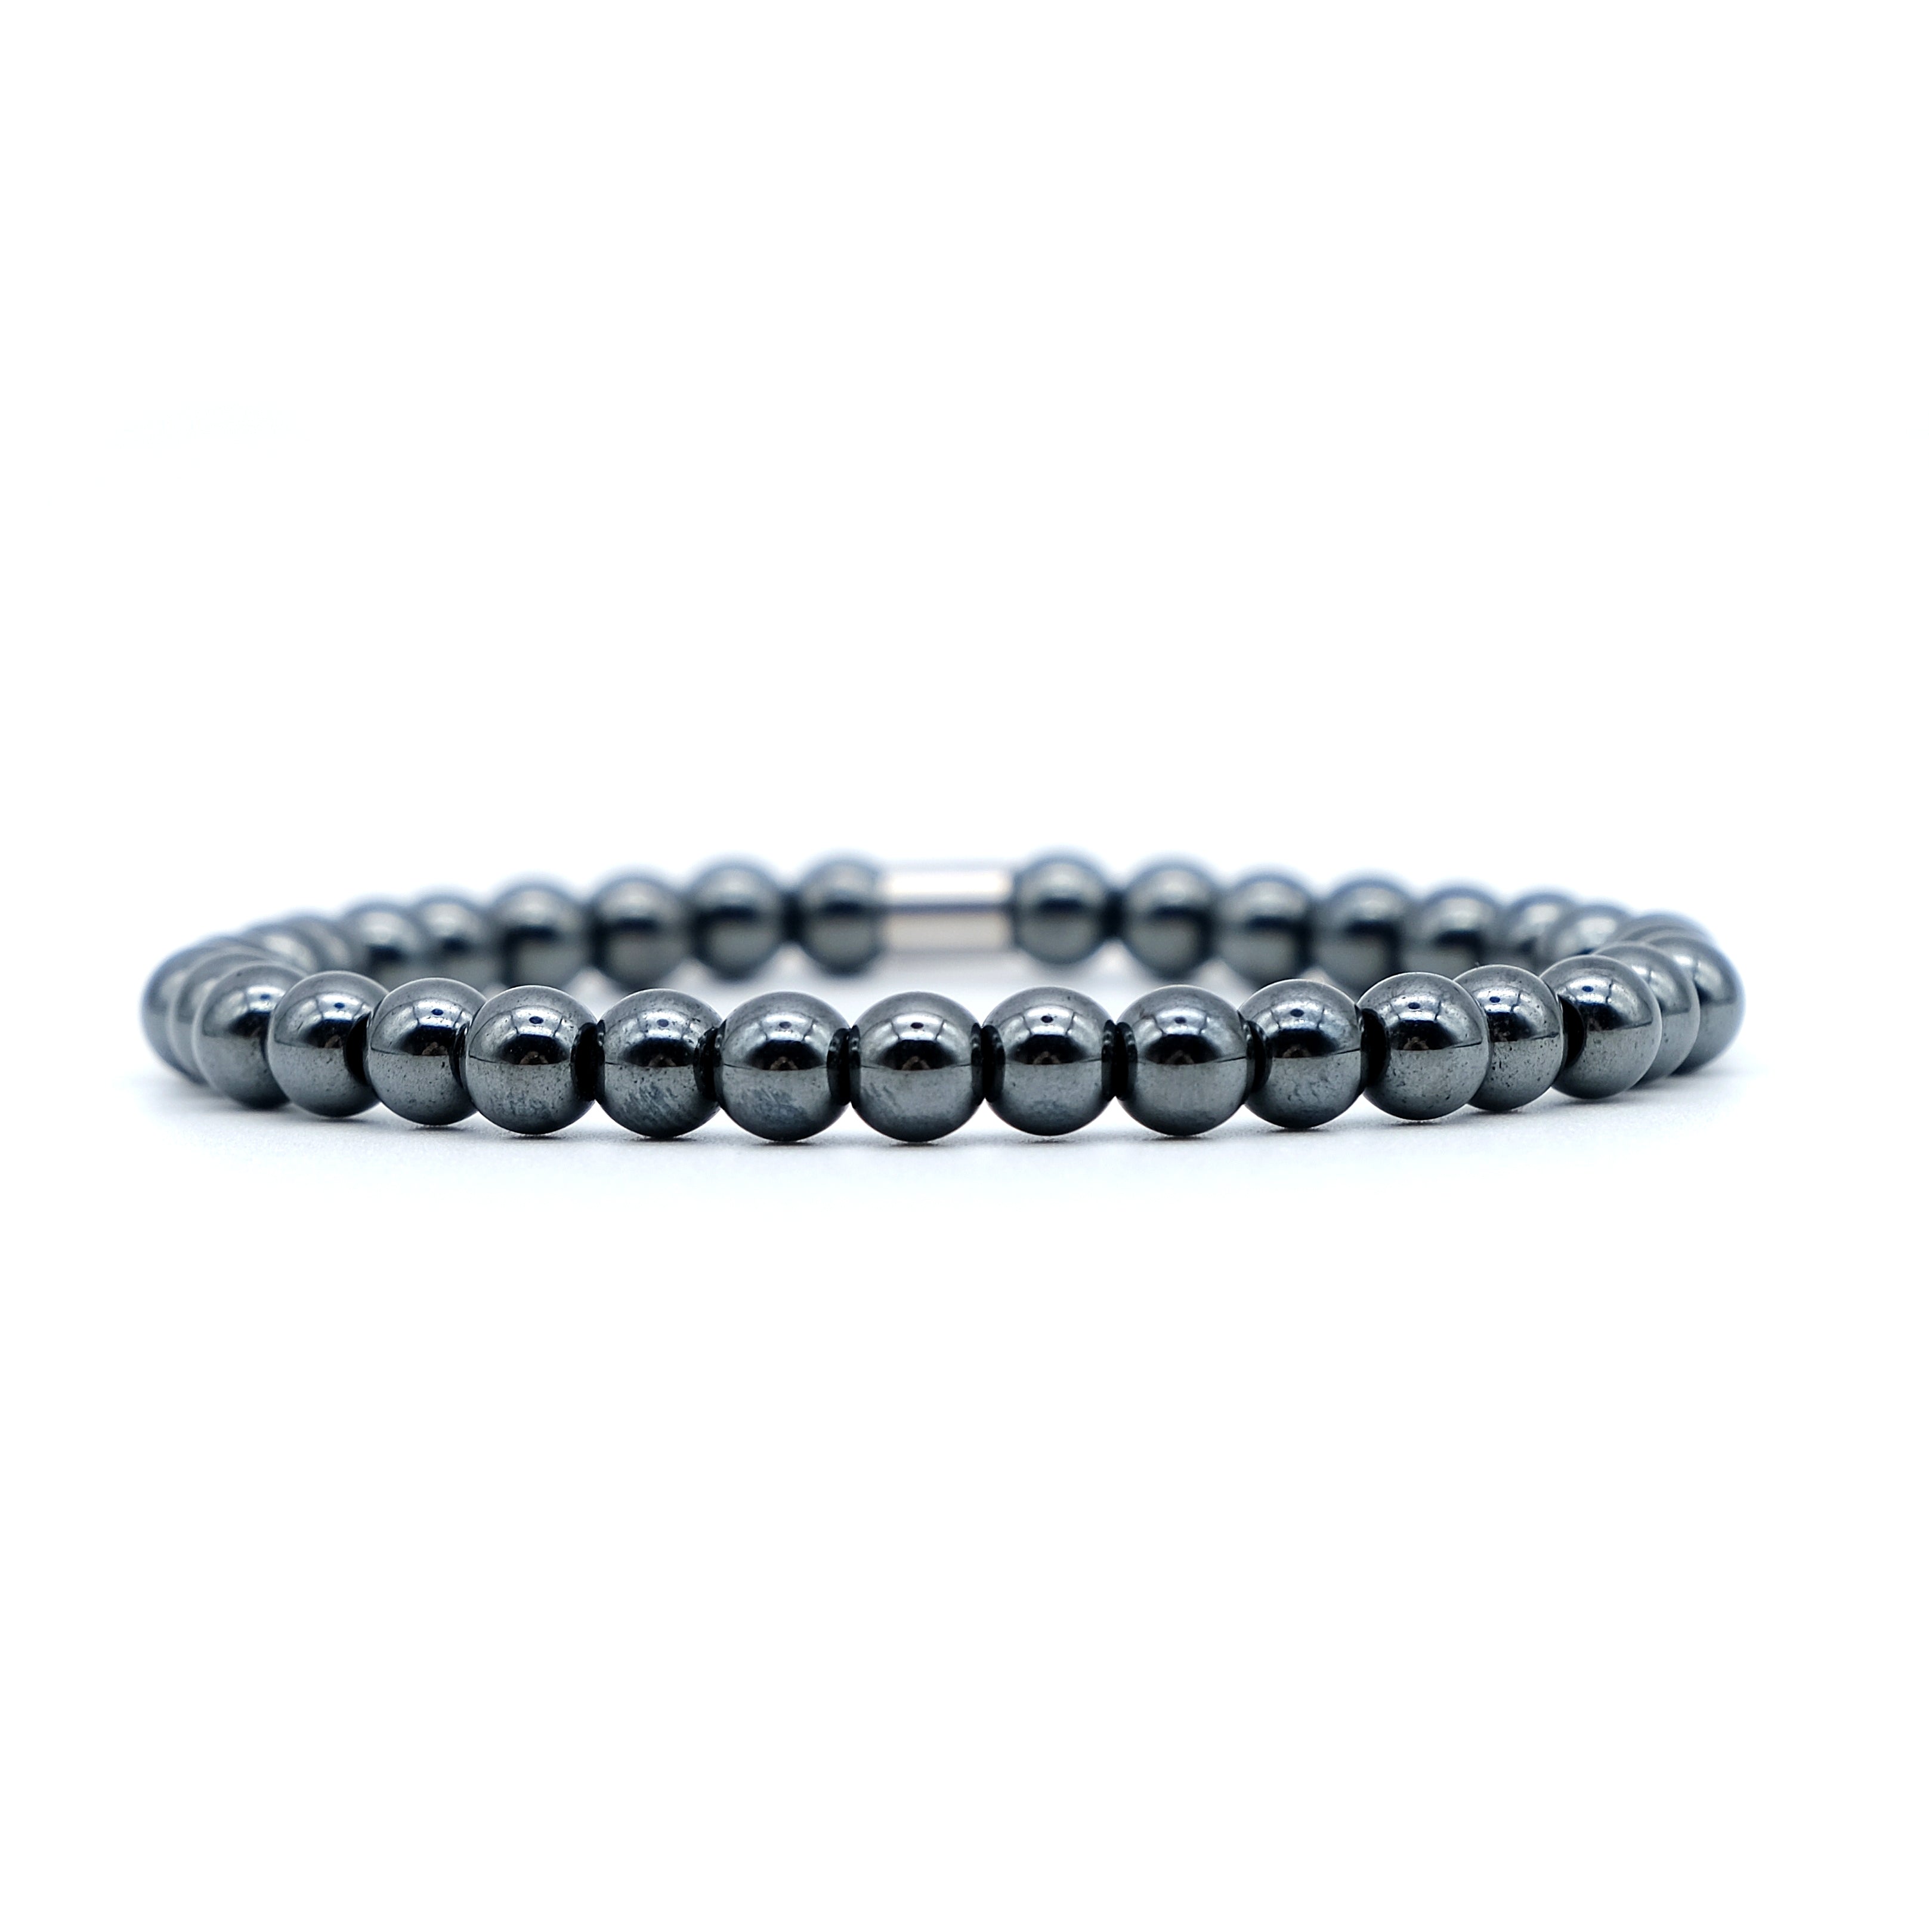 Thurcolas Men's Stone Power Hematite Bracelet with Central Pearl with  Skulls in Stainless Steel : Amazon.co.uk: Handmade Products